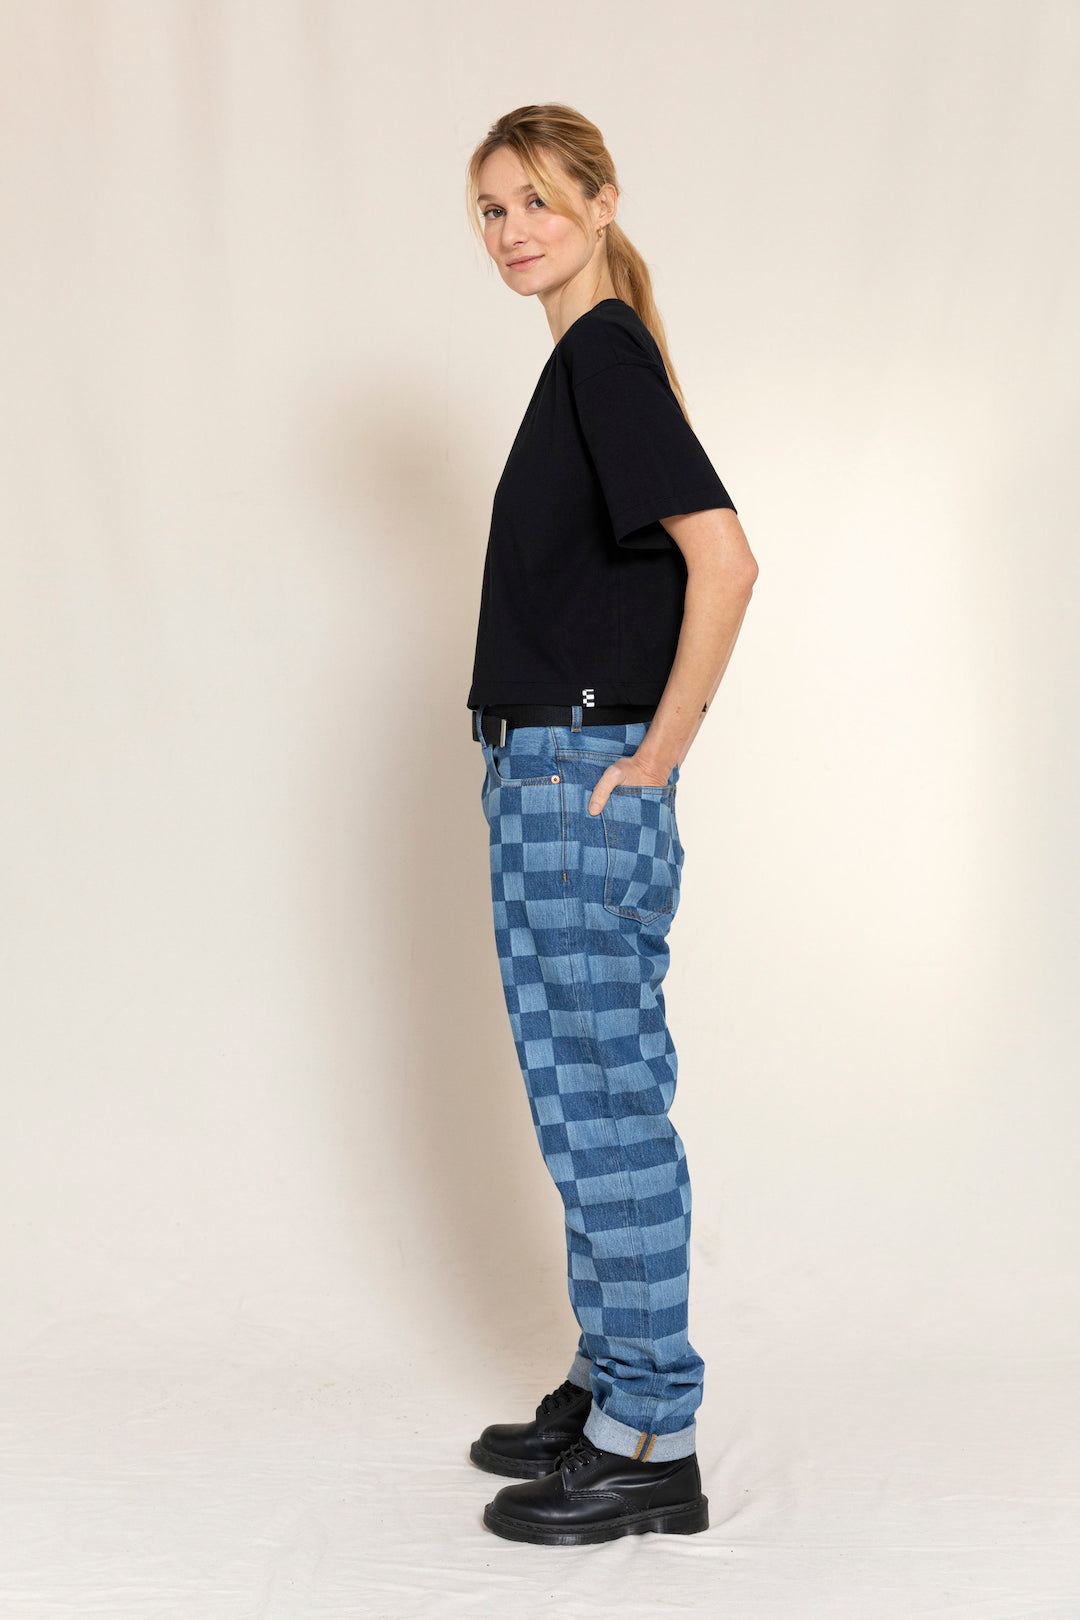 OLLIBIS Blue Denim Checkers - 5-Pocket Tapered Fit Jeans | Women